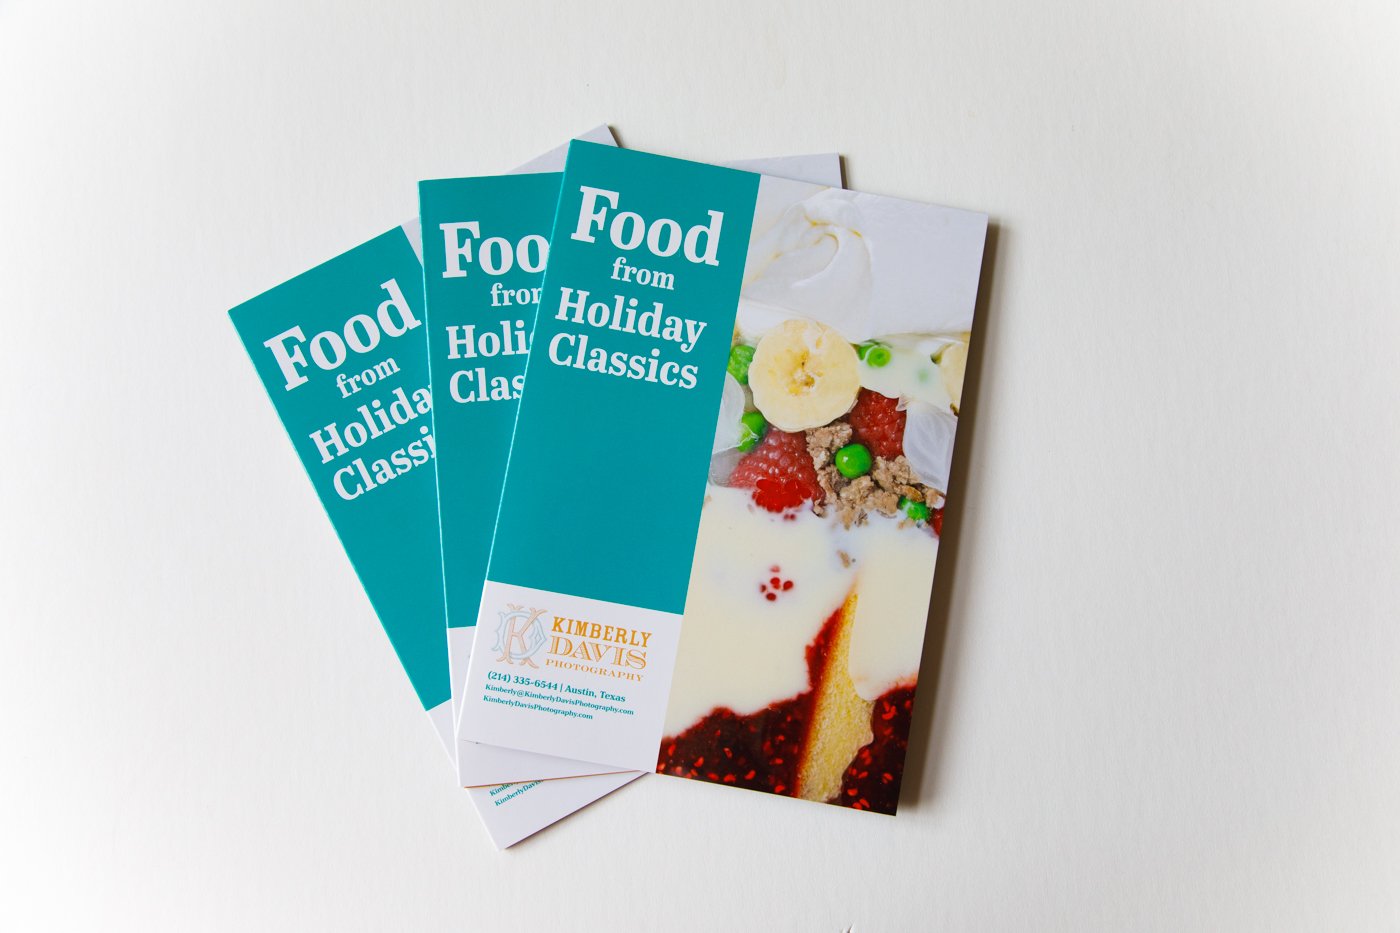 Books entitled "Food from Holiday Classics" by Kimberly Davis